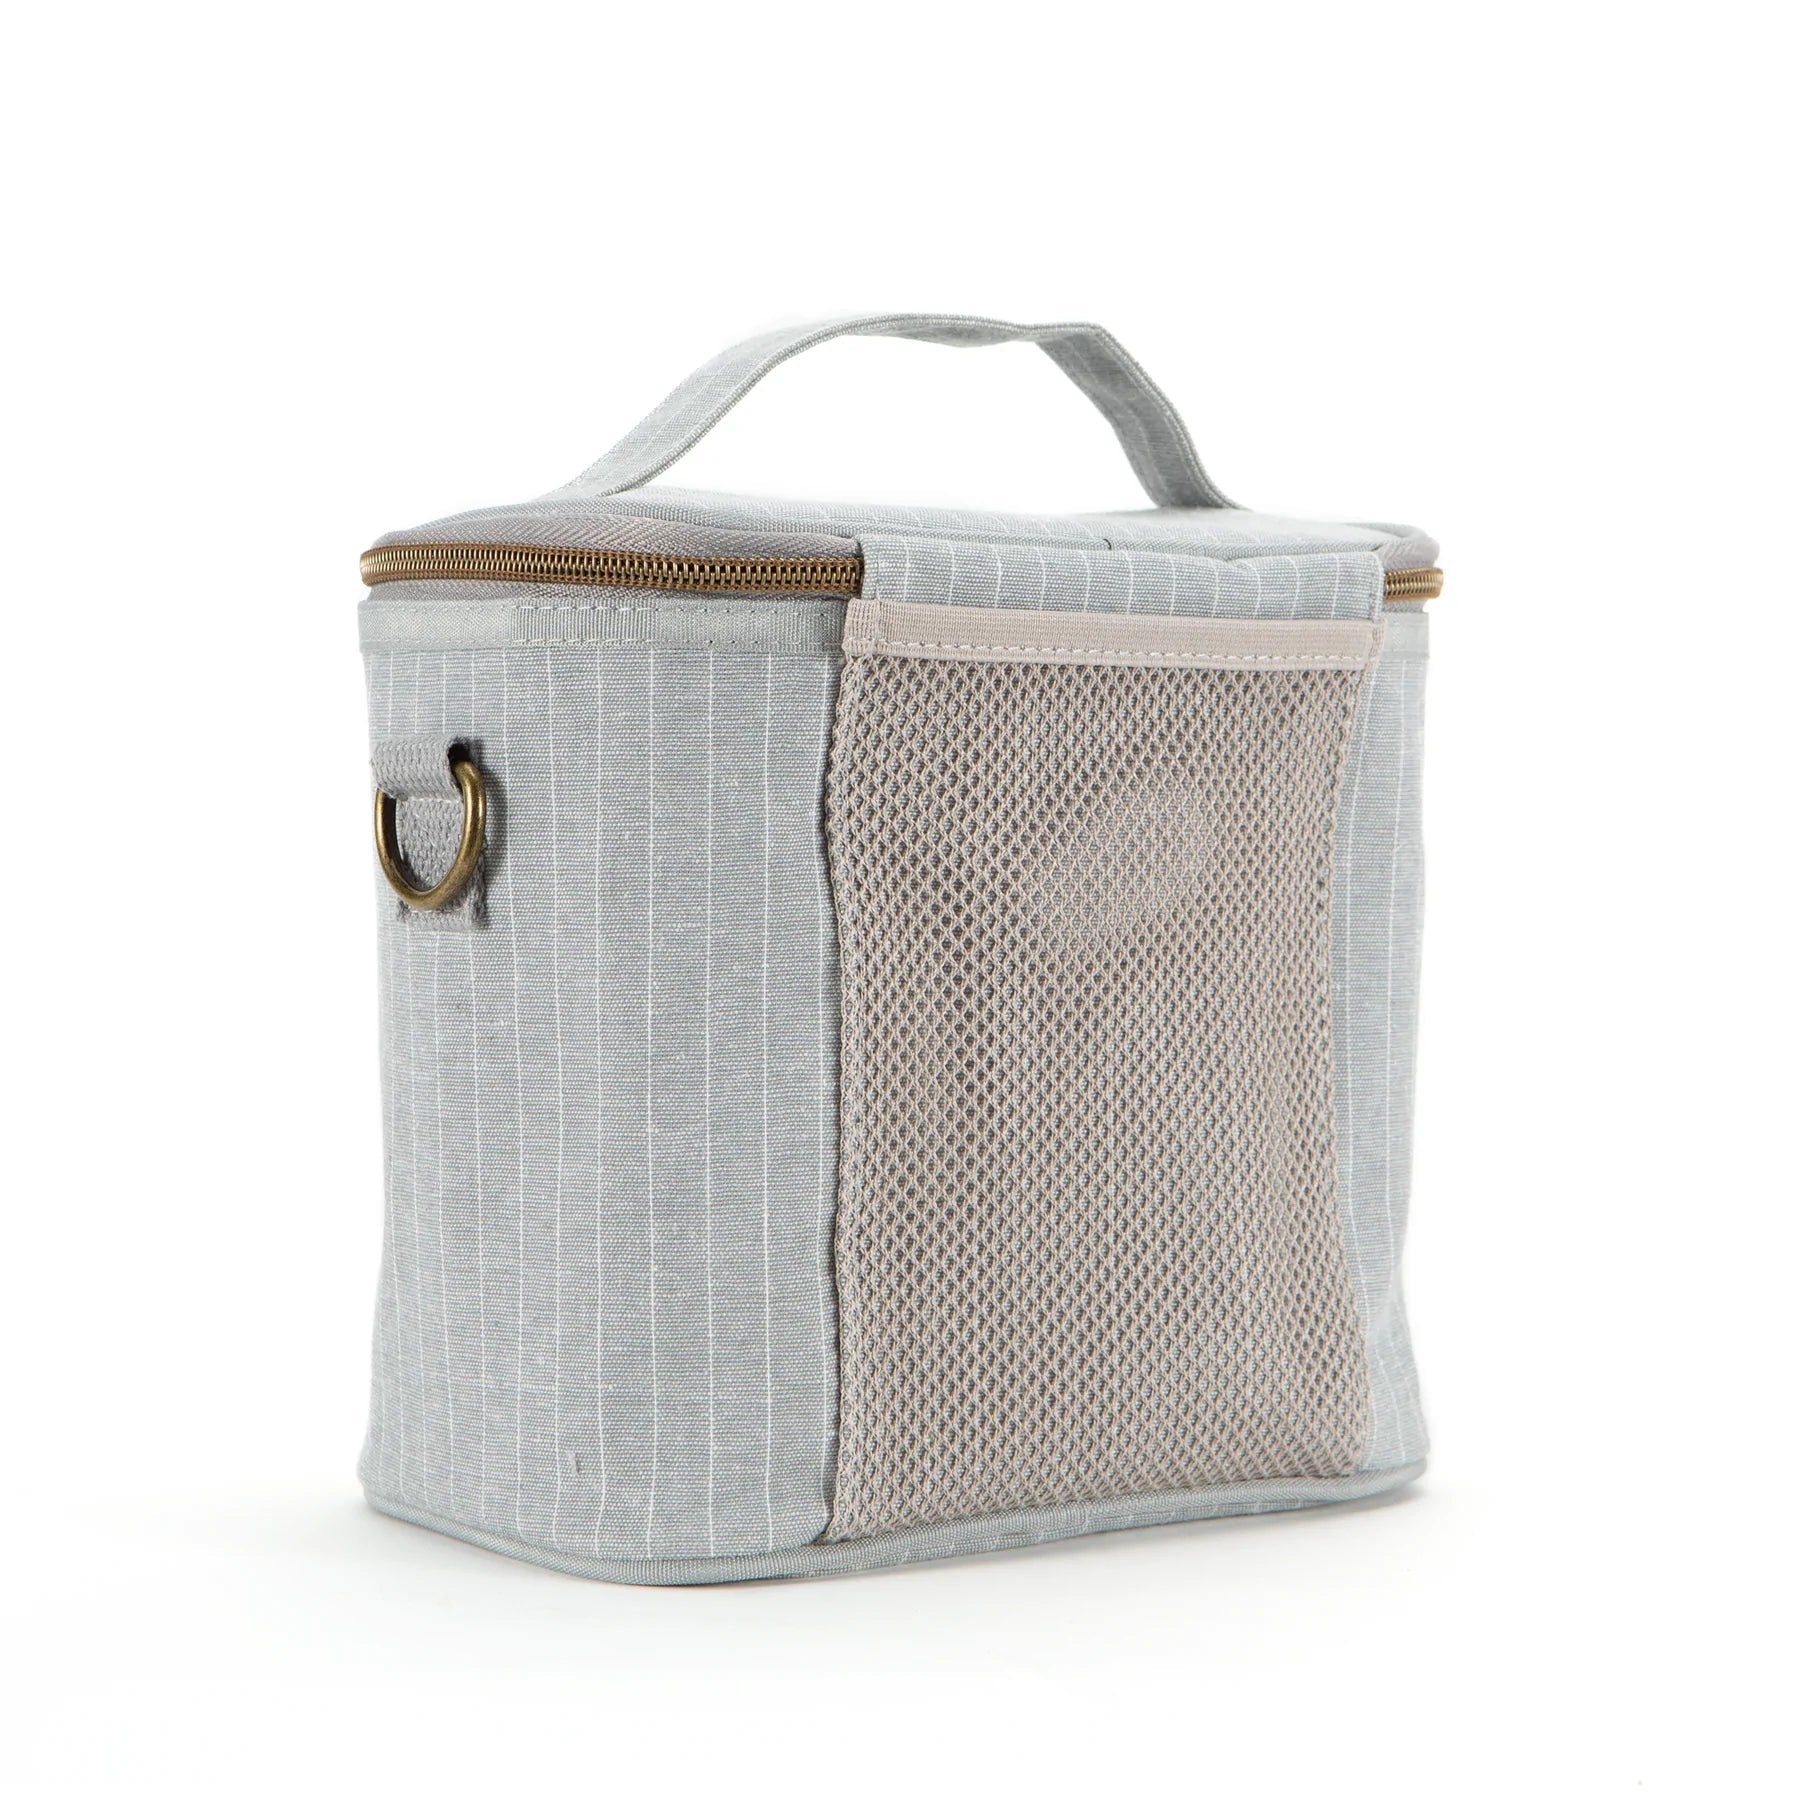 Linen Lunch Poche Bag - Pinstripe Heather Grey by SoYoung